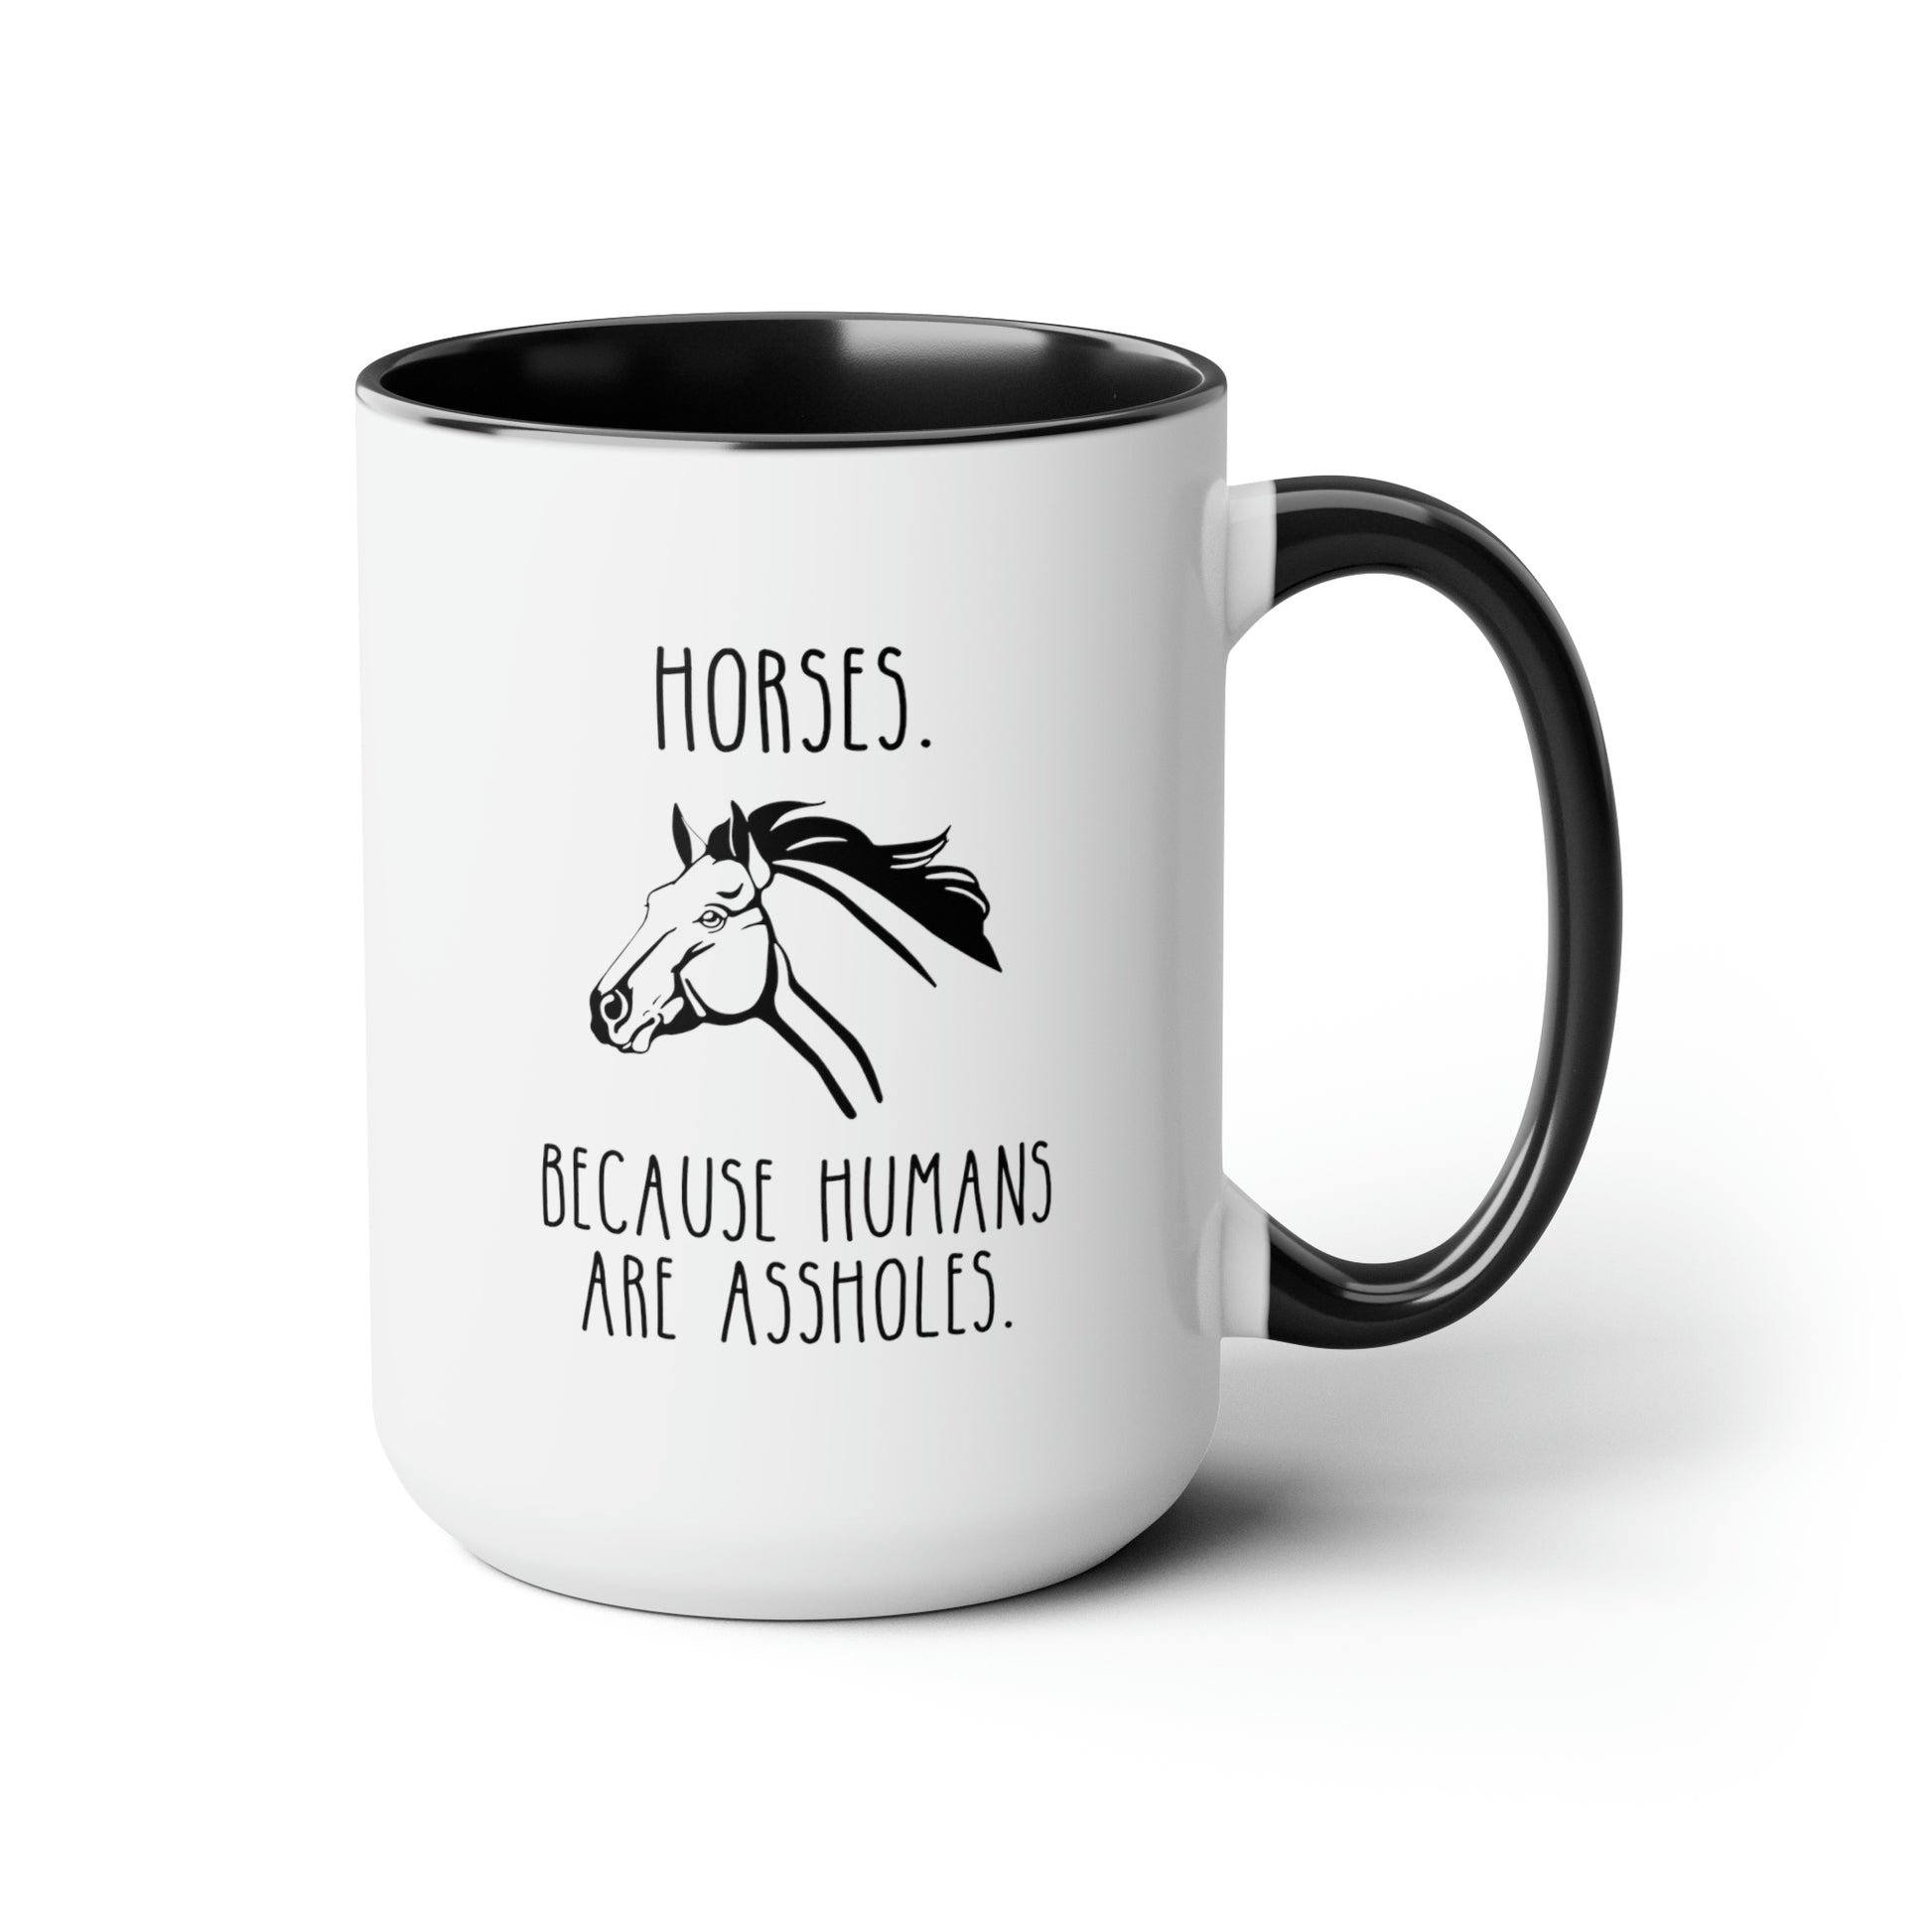 Horses Because Humans Are Assholes 15oz white with black accent funny large coffee mug gift for owner horse riding pony equestrian waveywares wavey wares wavywares wavy wares